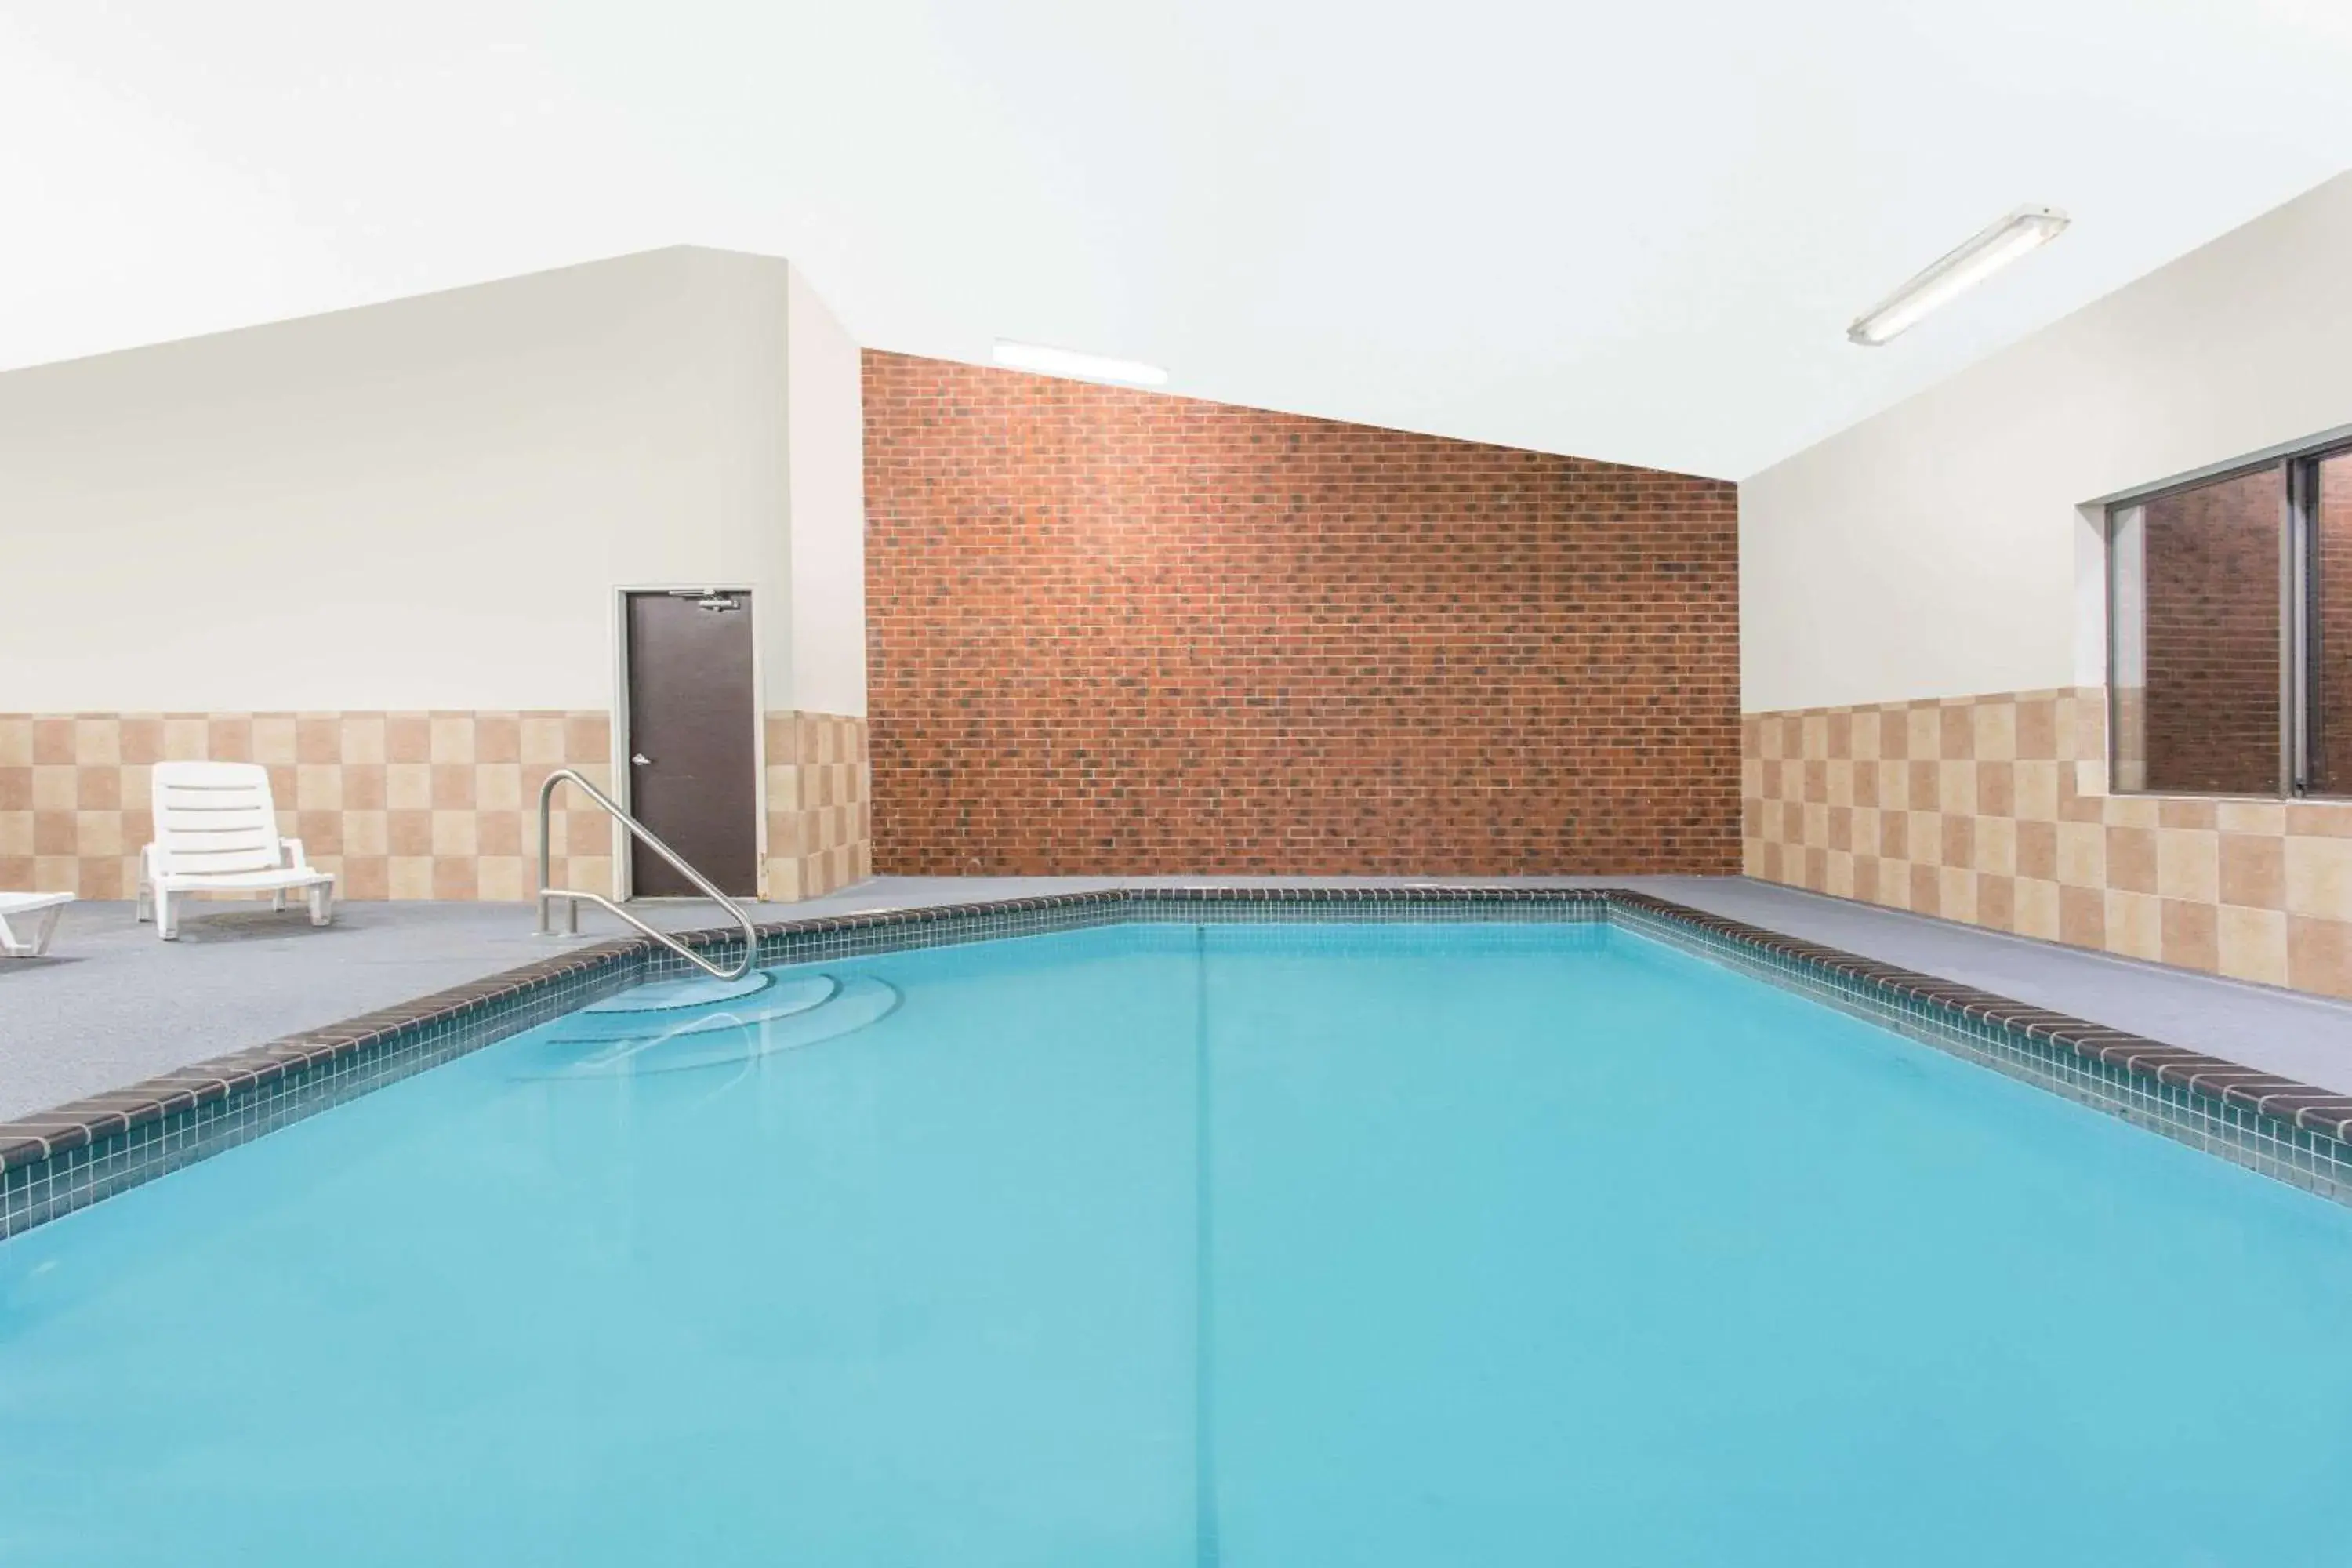 On site, Swimming Pool in Baymont by Wyndham Dubuque